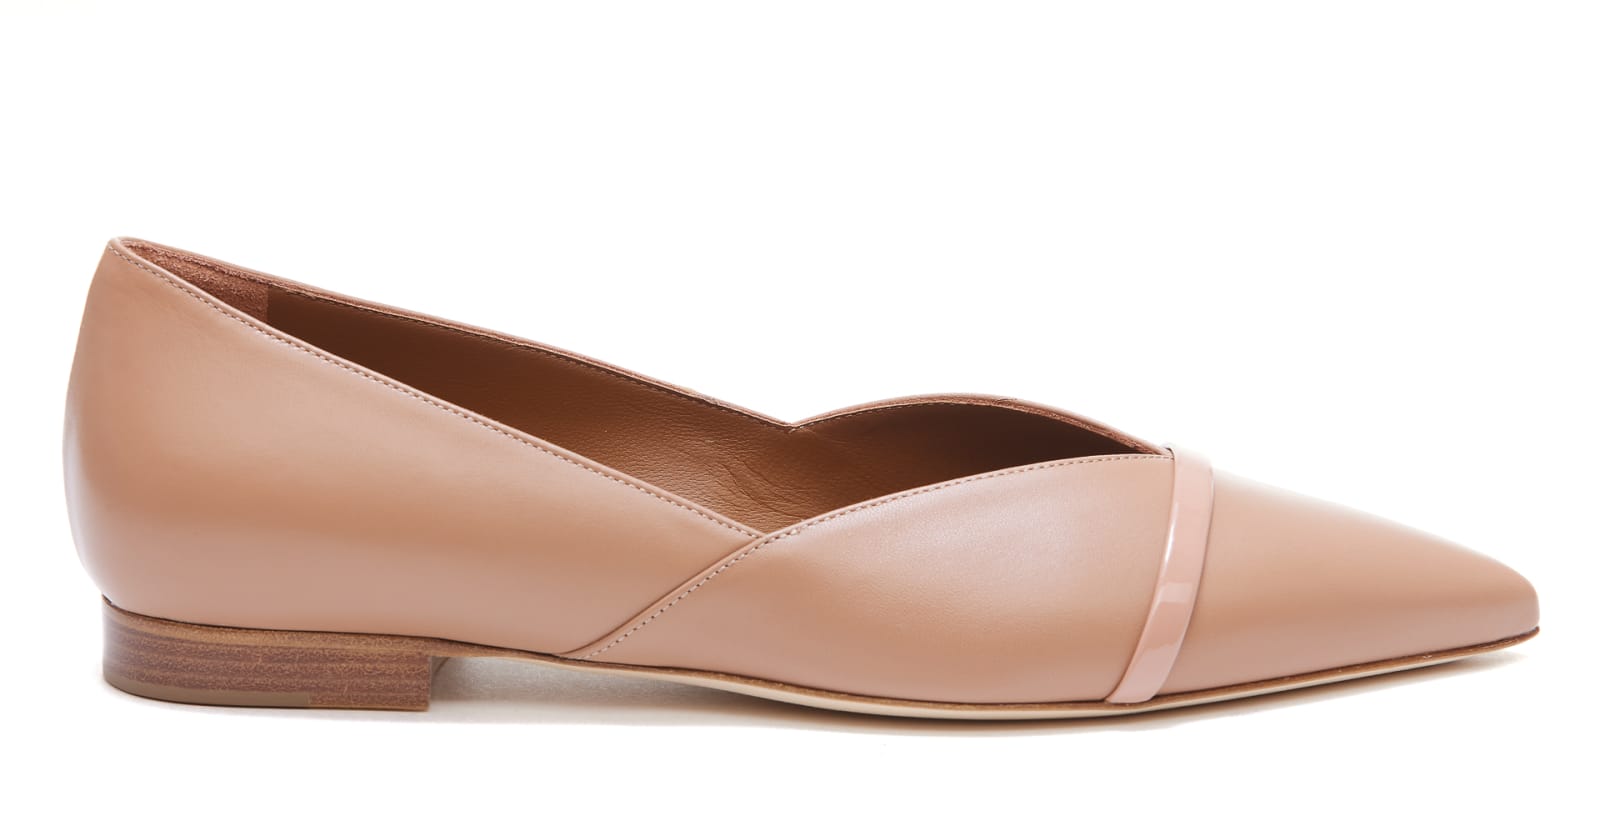 MALONE SOULIERS COLETTE FLATS